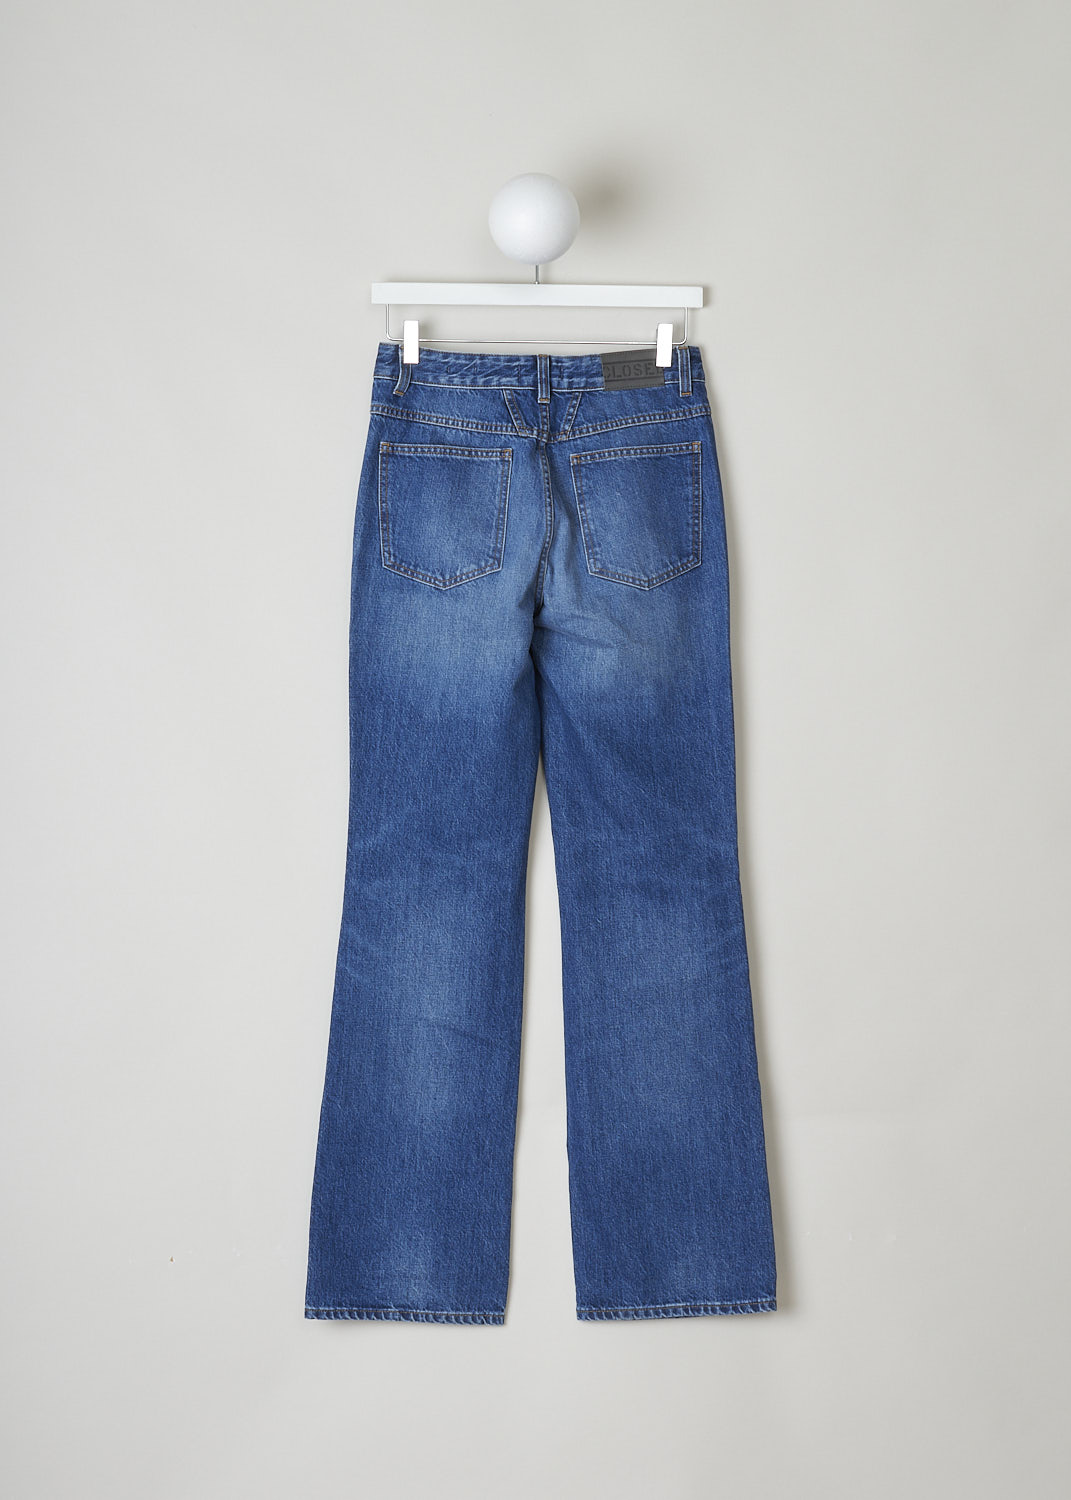 CLOSED, FLARED HIGH-WAIST JEANS IN A MID BLUE WASH, LEAF_C91301_15X_31_MBL, Blue, Back, These high-waisted jeans in a mid blue wash have a narrow waistband with belt loops. A button and zipper function as the closure option. These pants have a 5-pocket design, with two slanted pockets and a coin pocket in the front and two patch pockets in the back. These pants have flared pant legs. 
